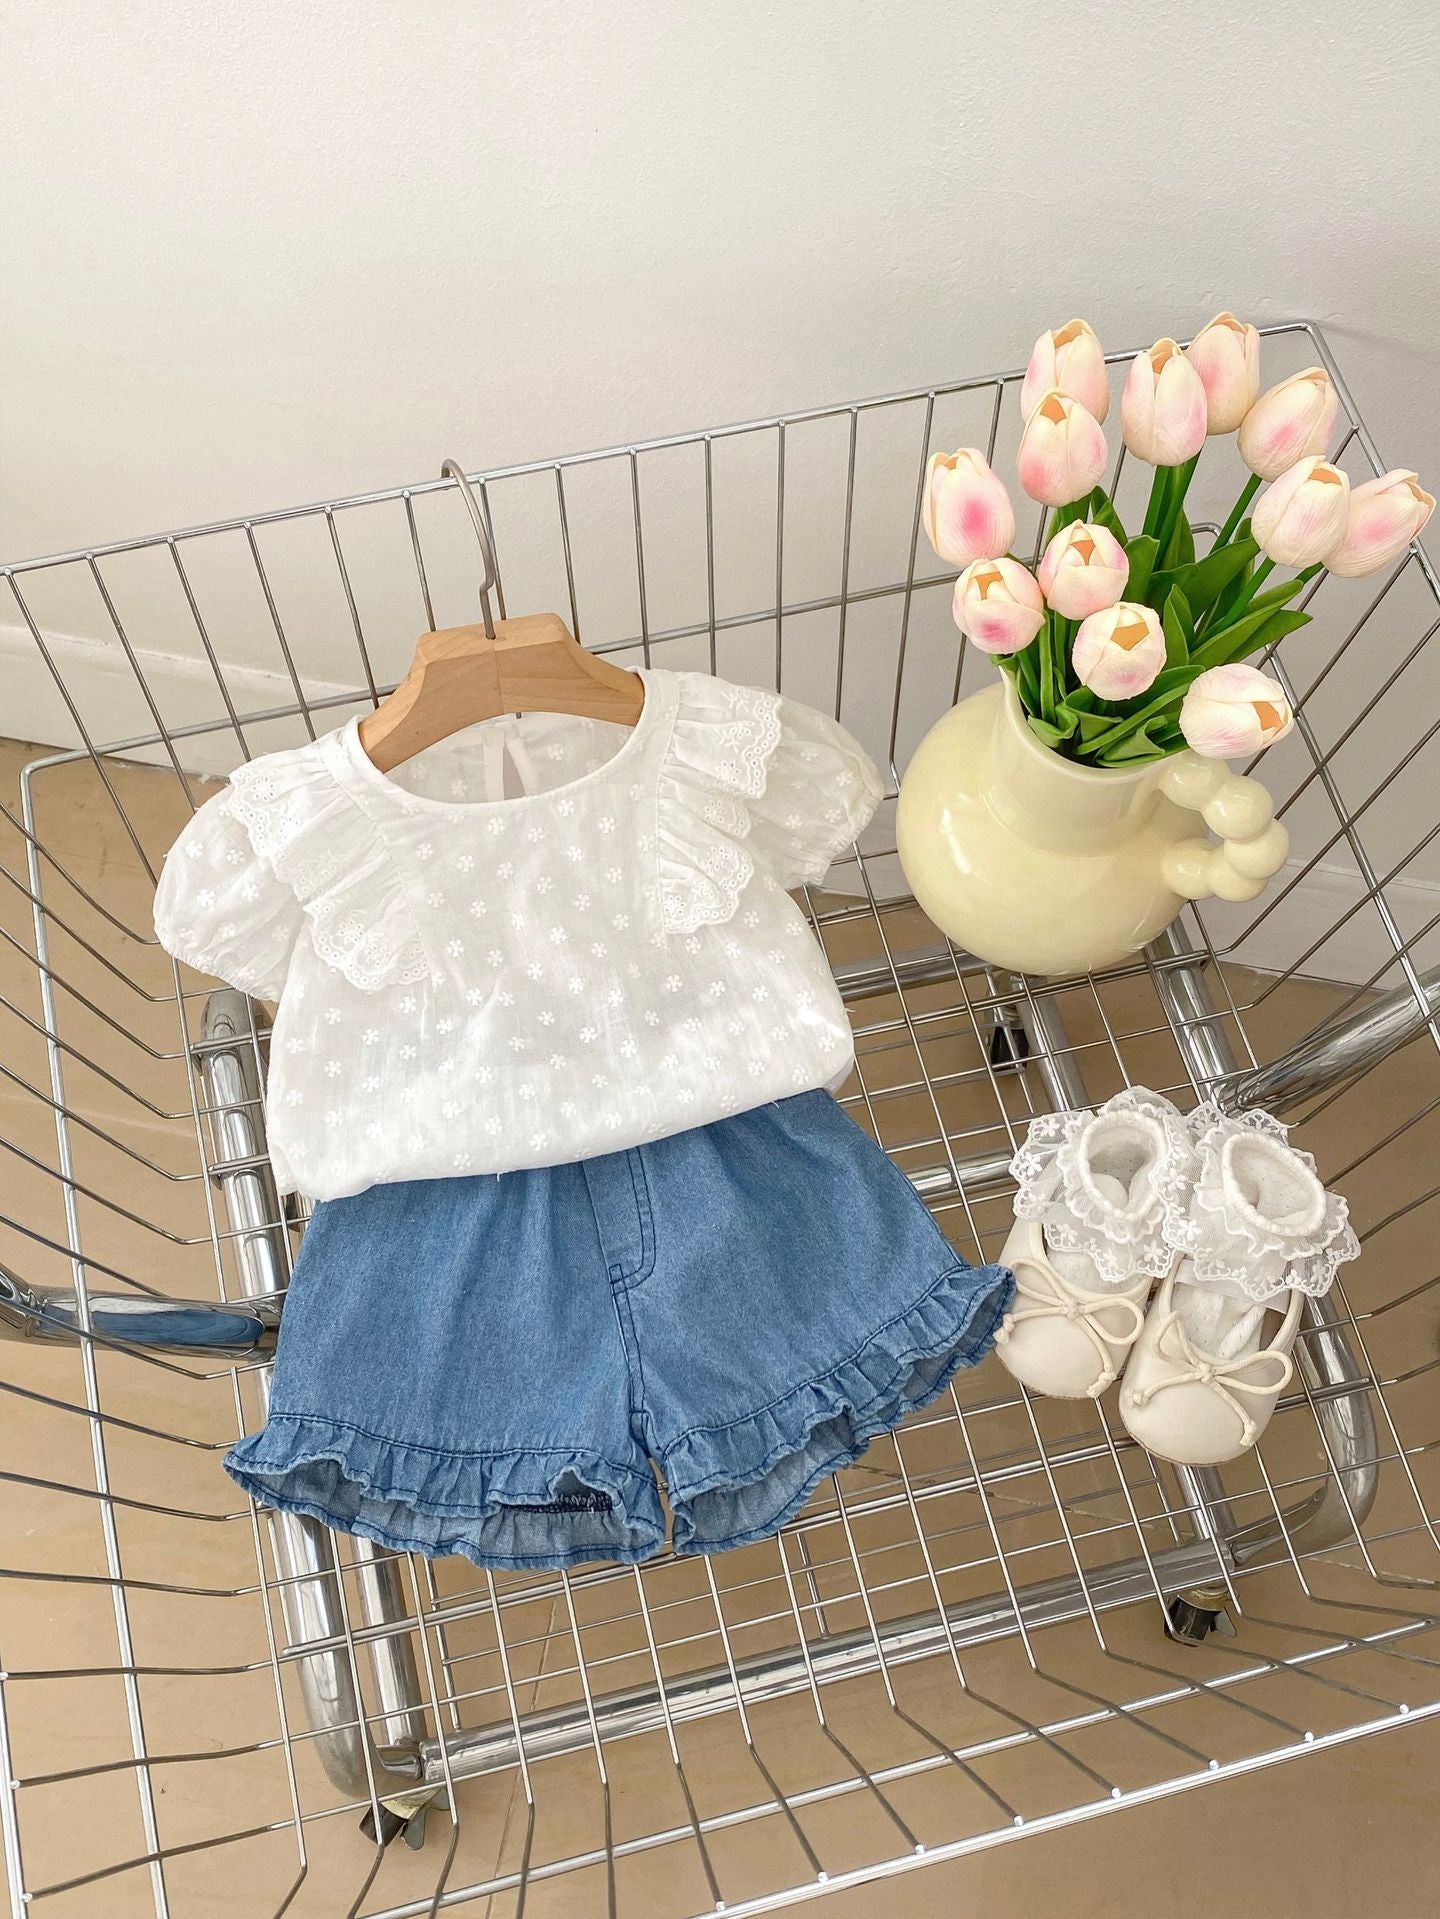 Summer Hot Selling Baby Girls Floral Embroidery Short Sleeves Top And Denim Shorts Clothing Set